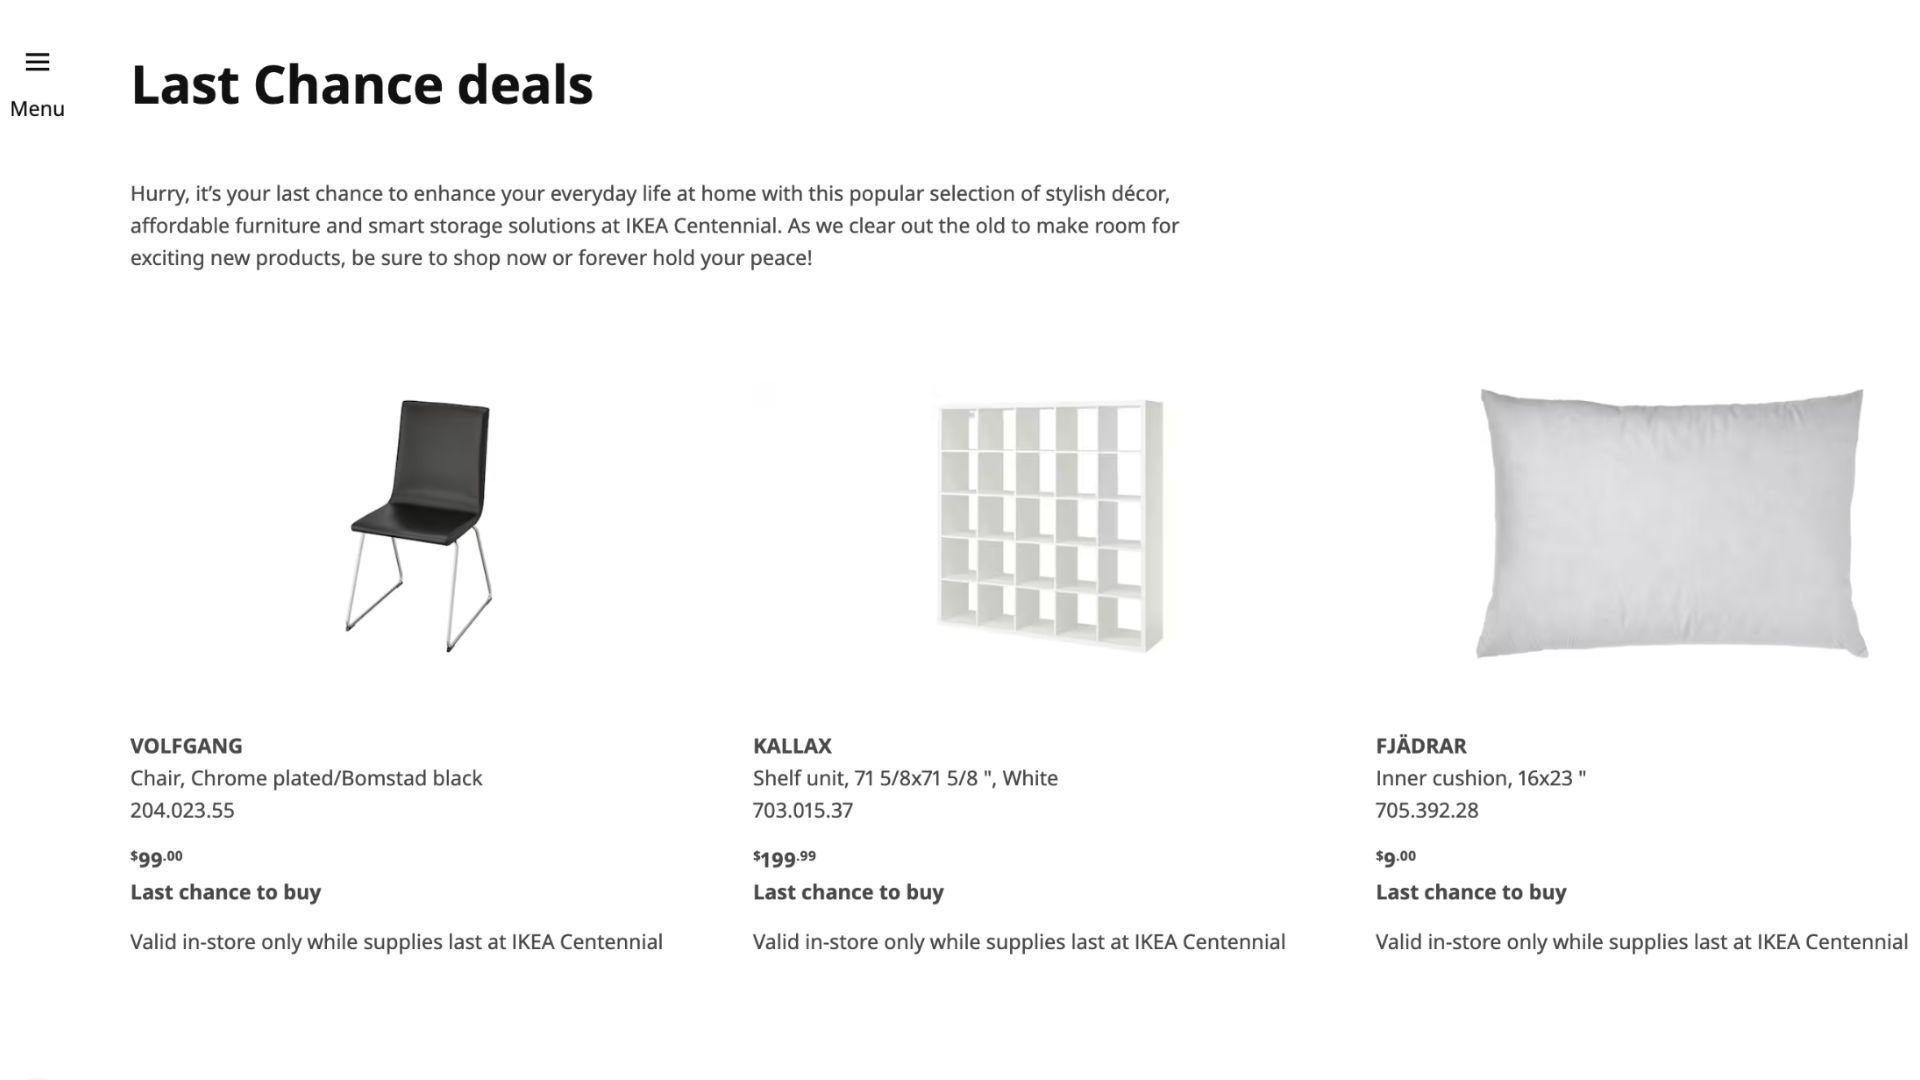 Last Chance deals collection on Ikea's website